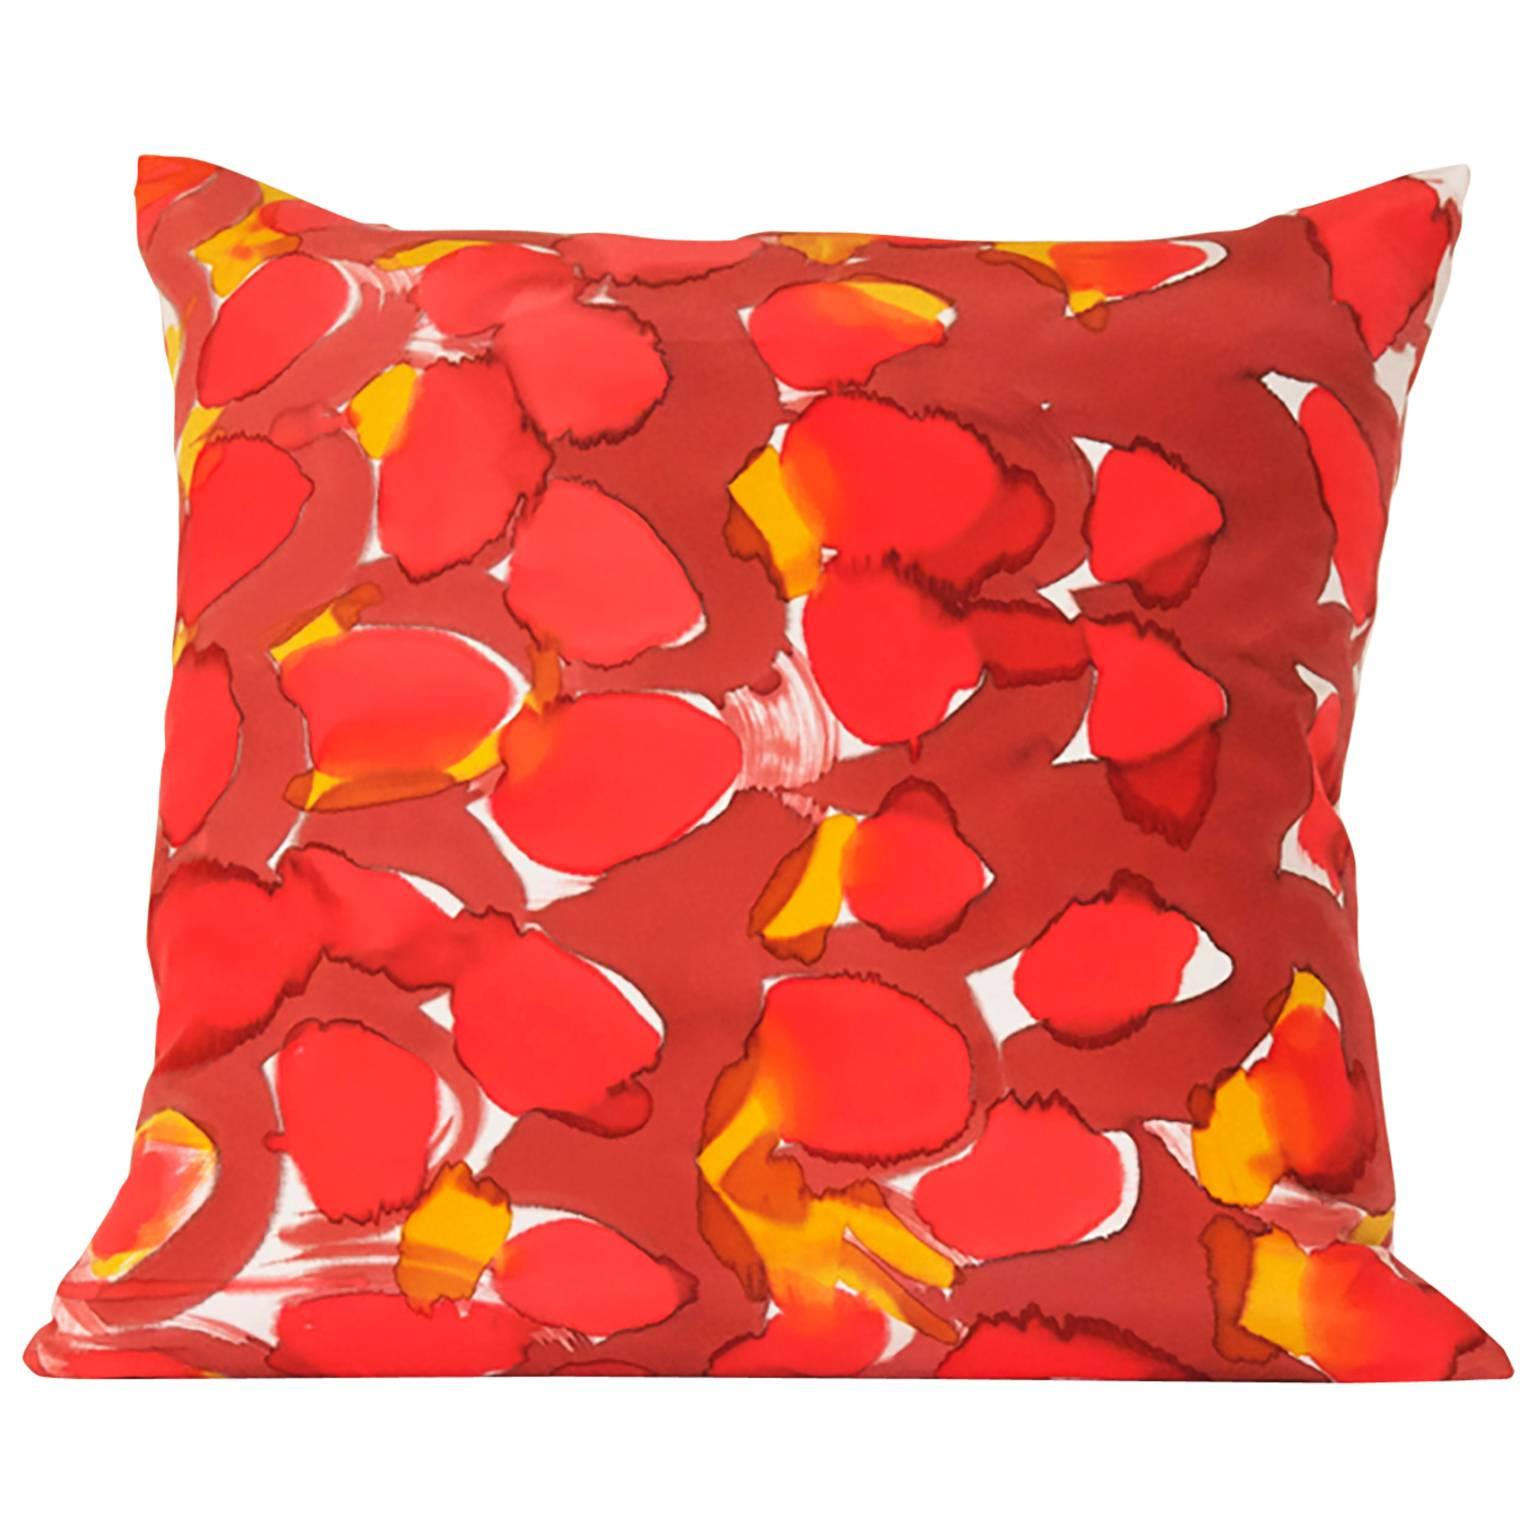 Hand Painted Red Scales Square Silk Charmeuse Pillow